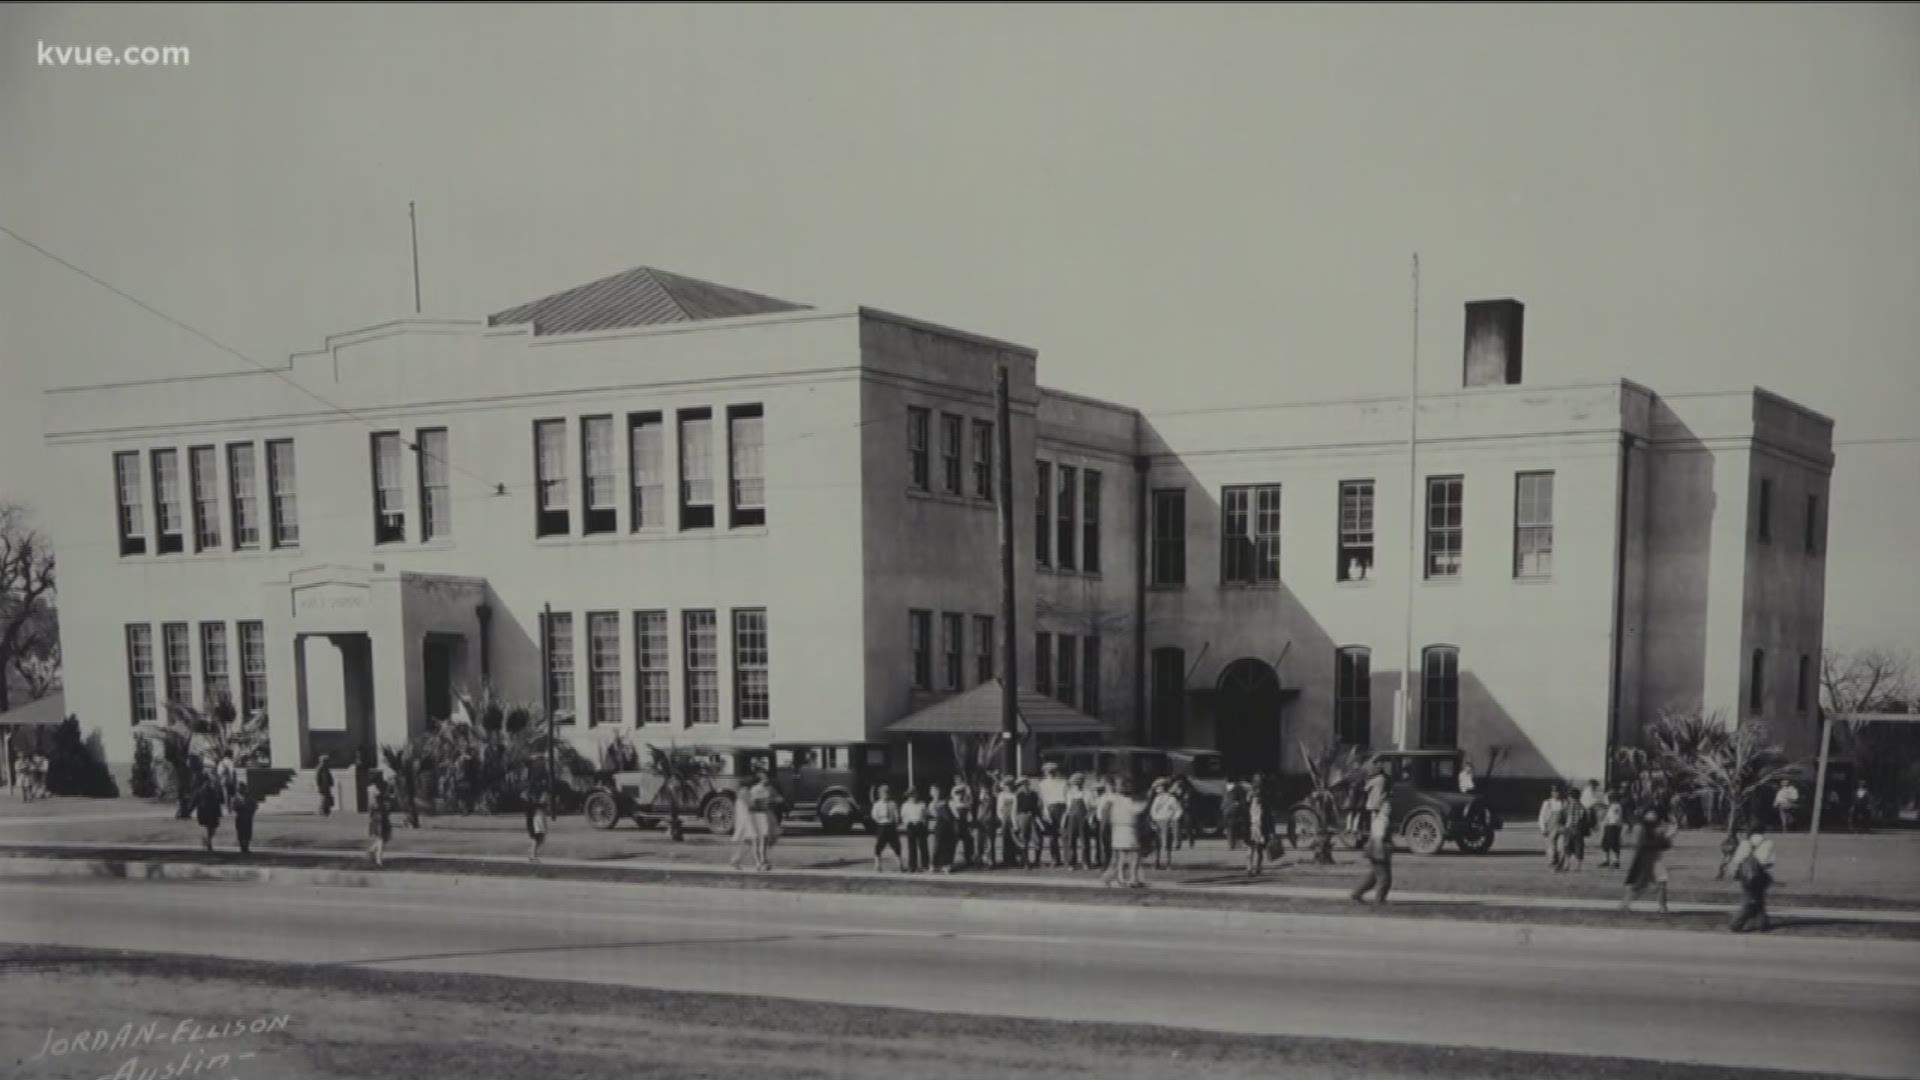 The City of Austin has made an offer to buy a historic downtown school.